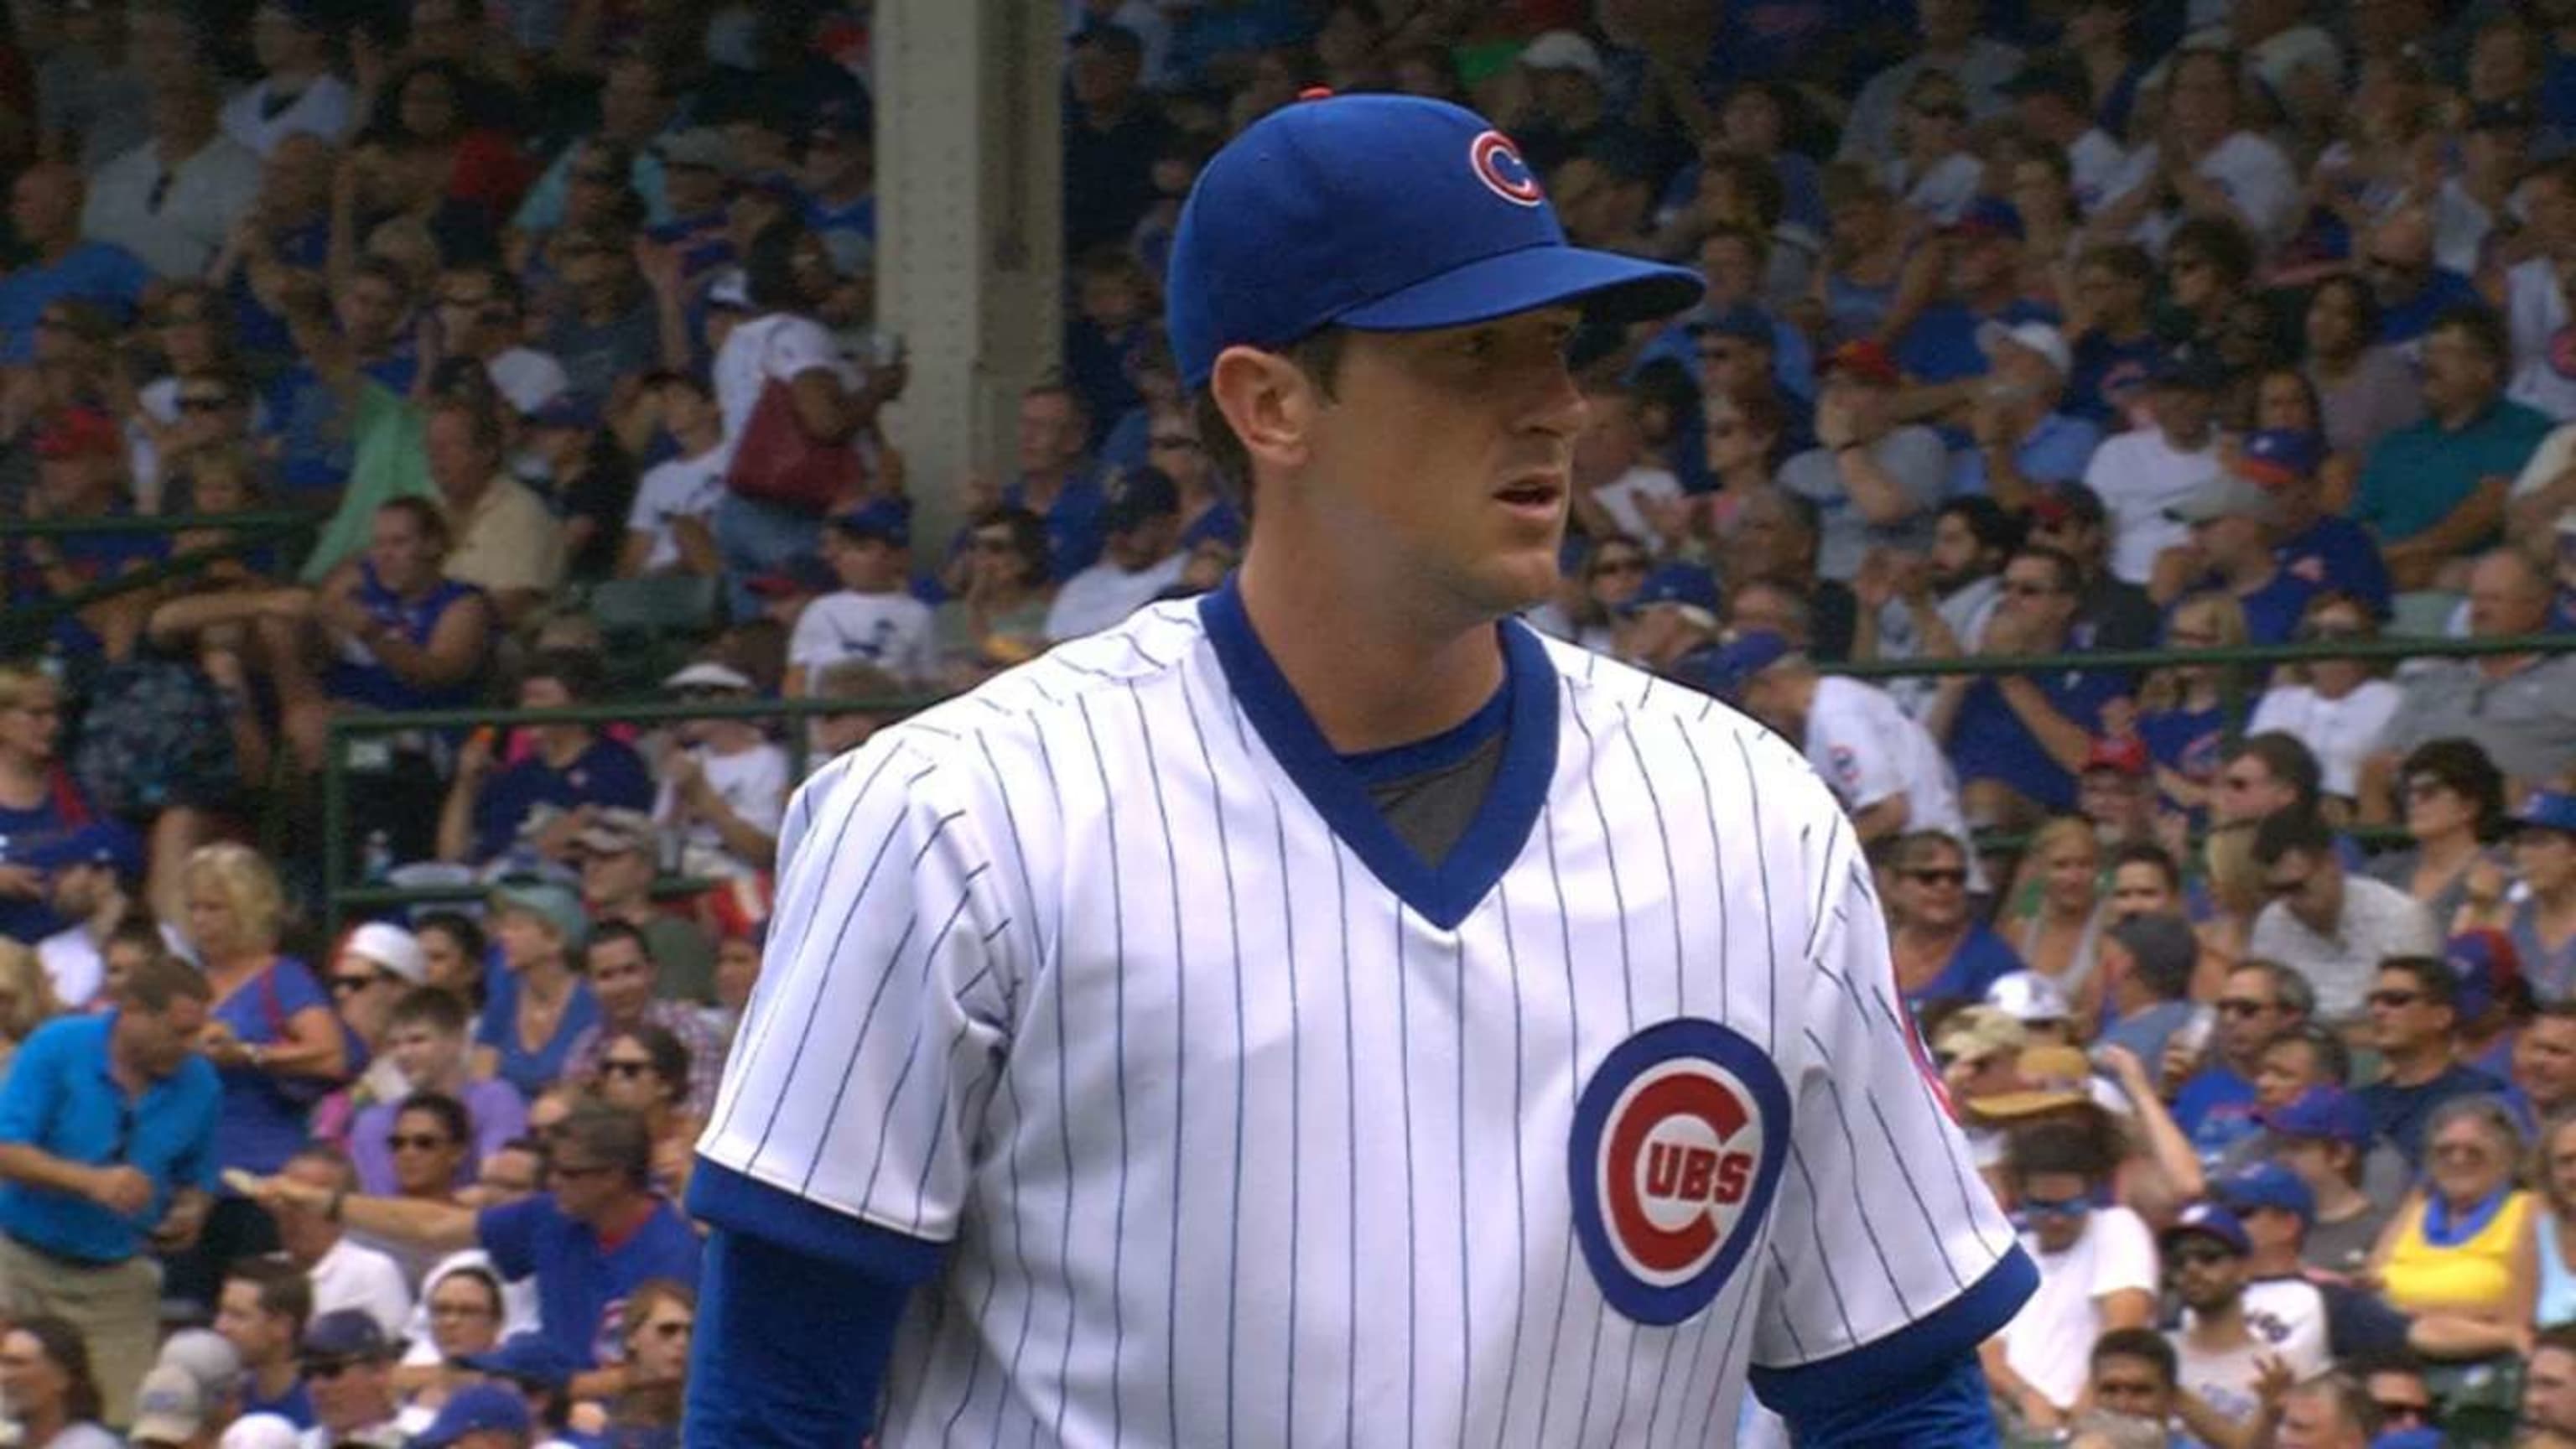 Best buds Anthony Rizzo, Kris Bryant help lift Cubs to long